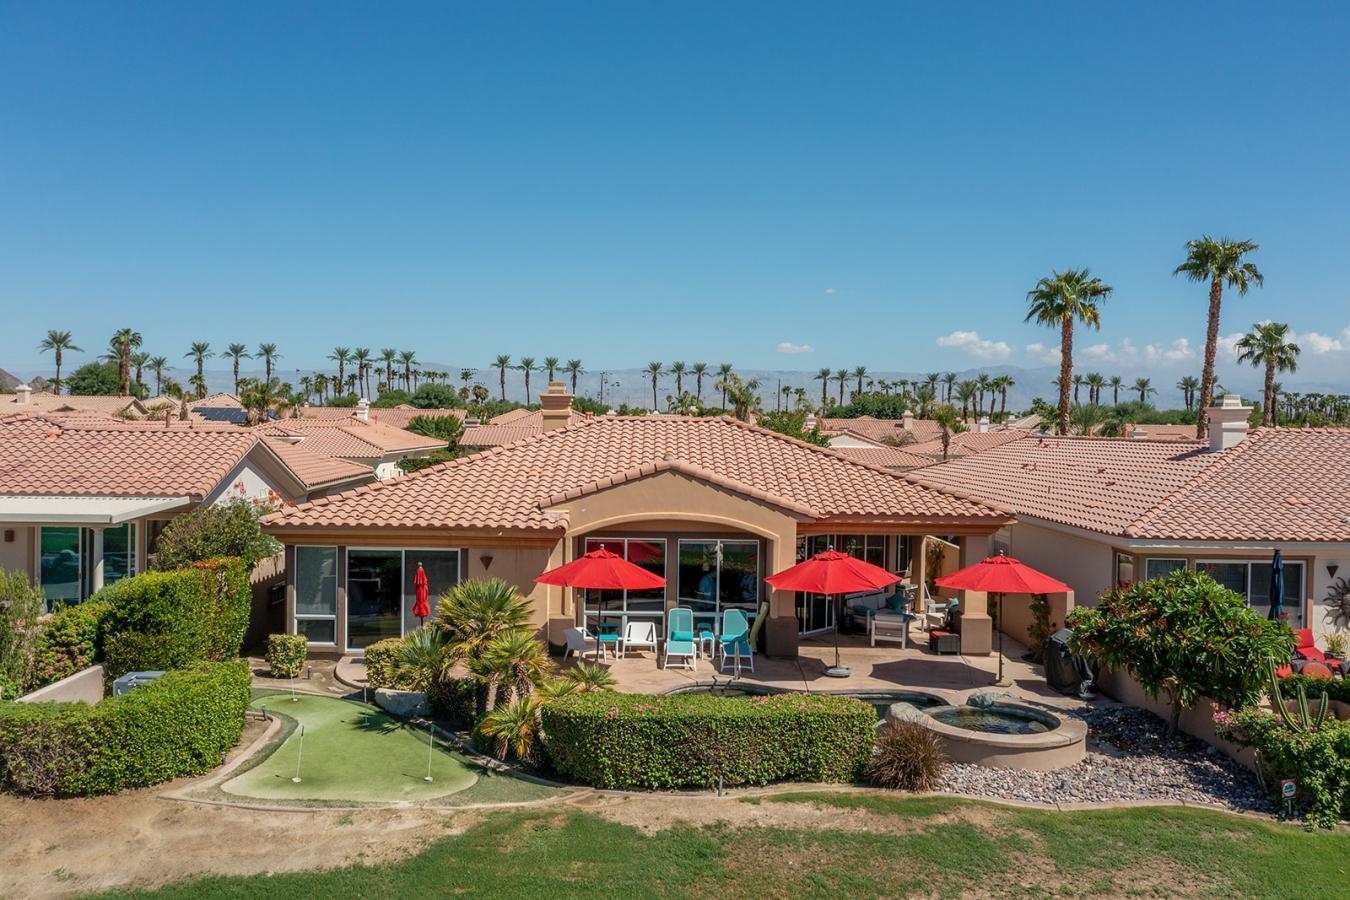 78775 Castle Pines Drive, La Quinta, California, 92253, United States, 3 Bedrooms Bedrooms, ,3 BathroomsBathrooms,Residential,For Sale,78775 Castle Pines Drive,1363269